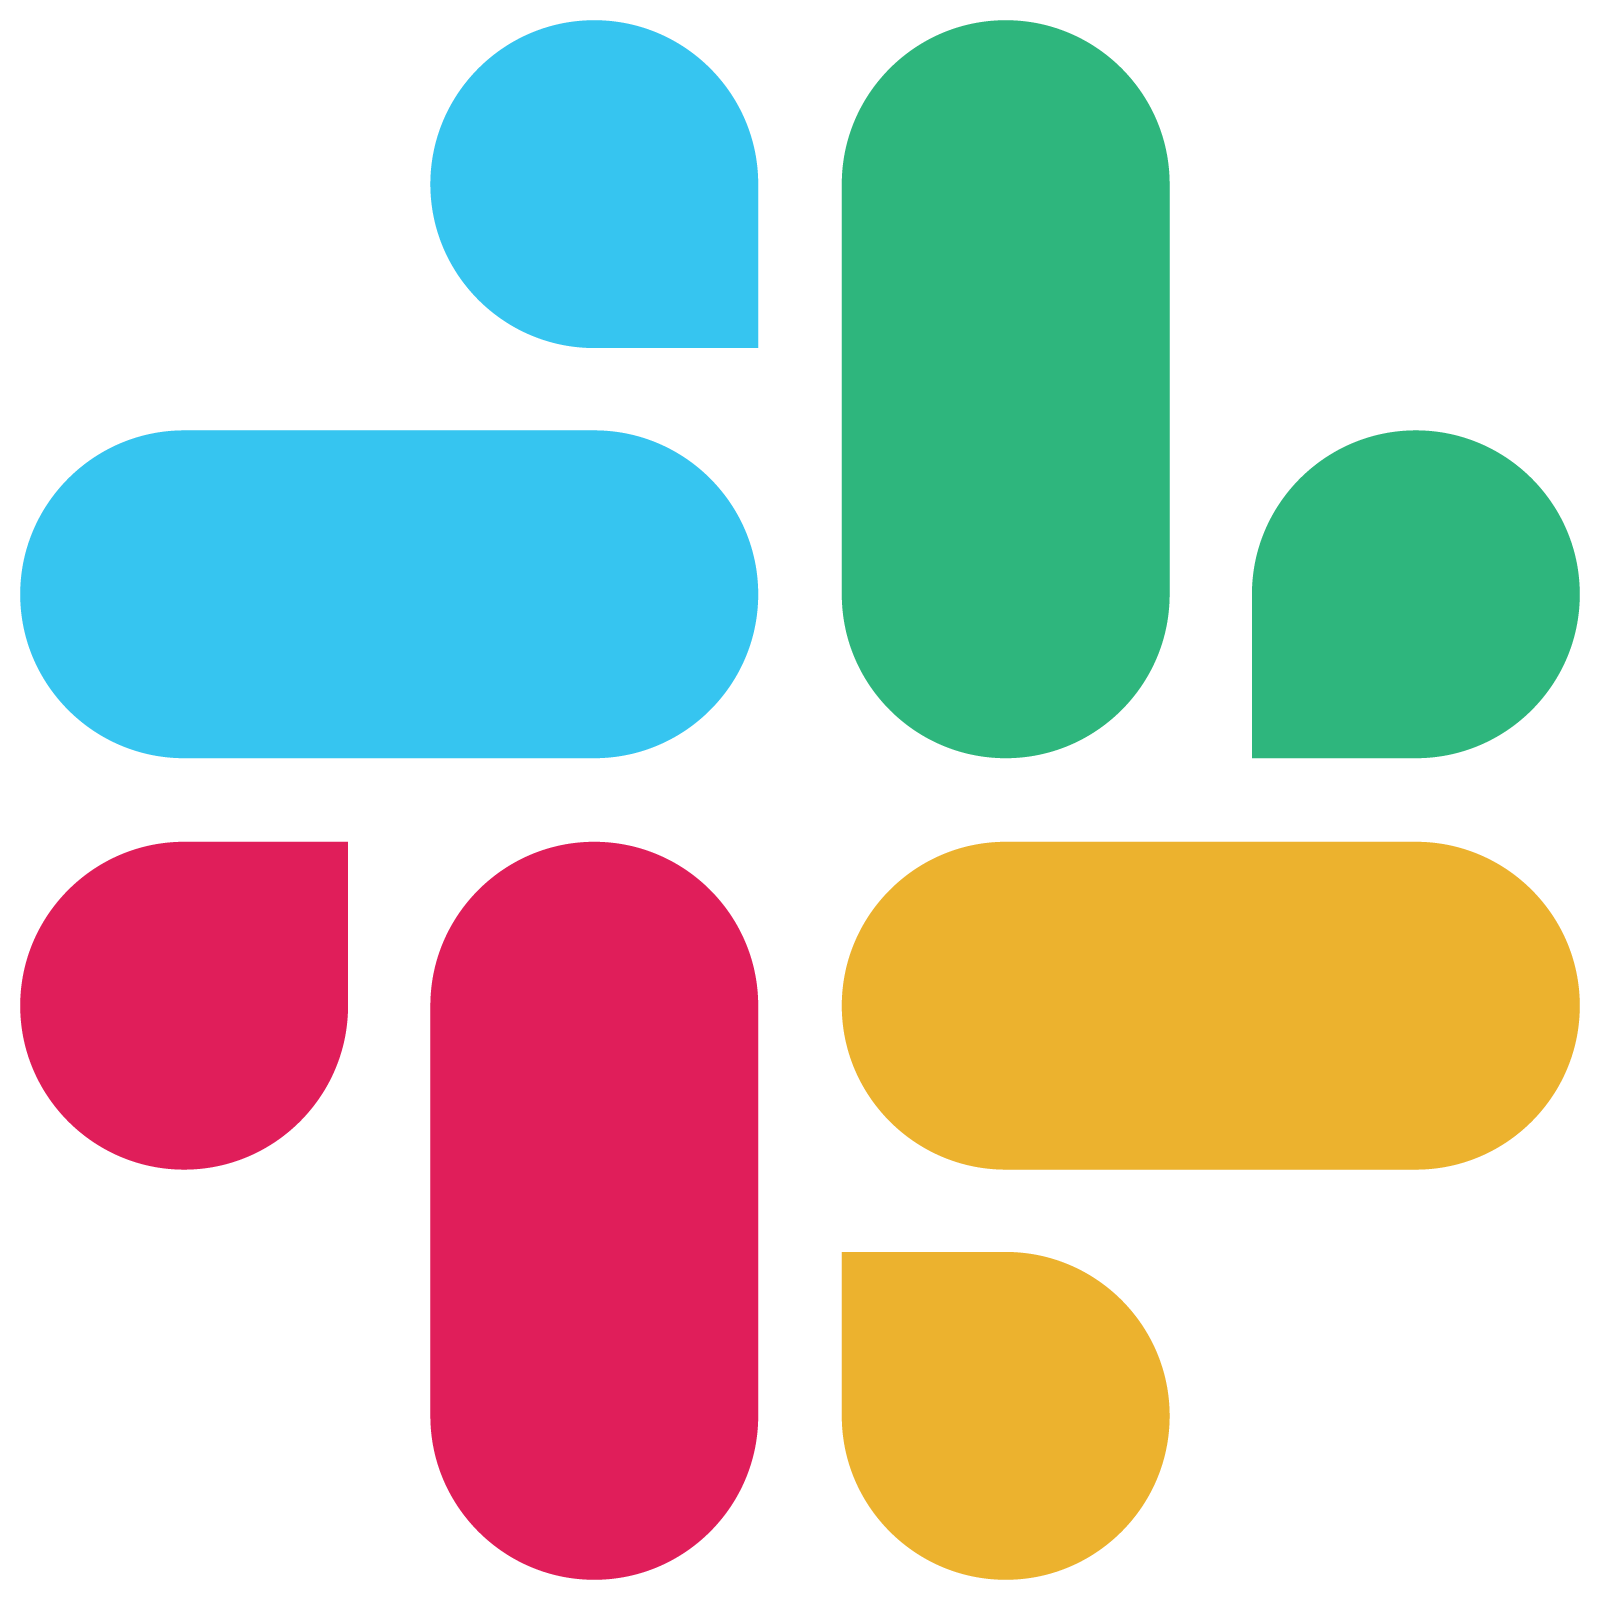 Chat with us on Slack